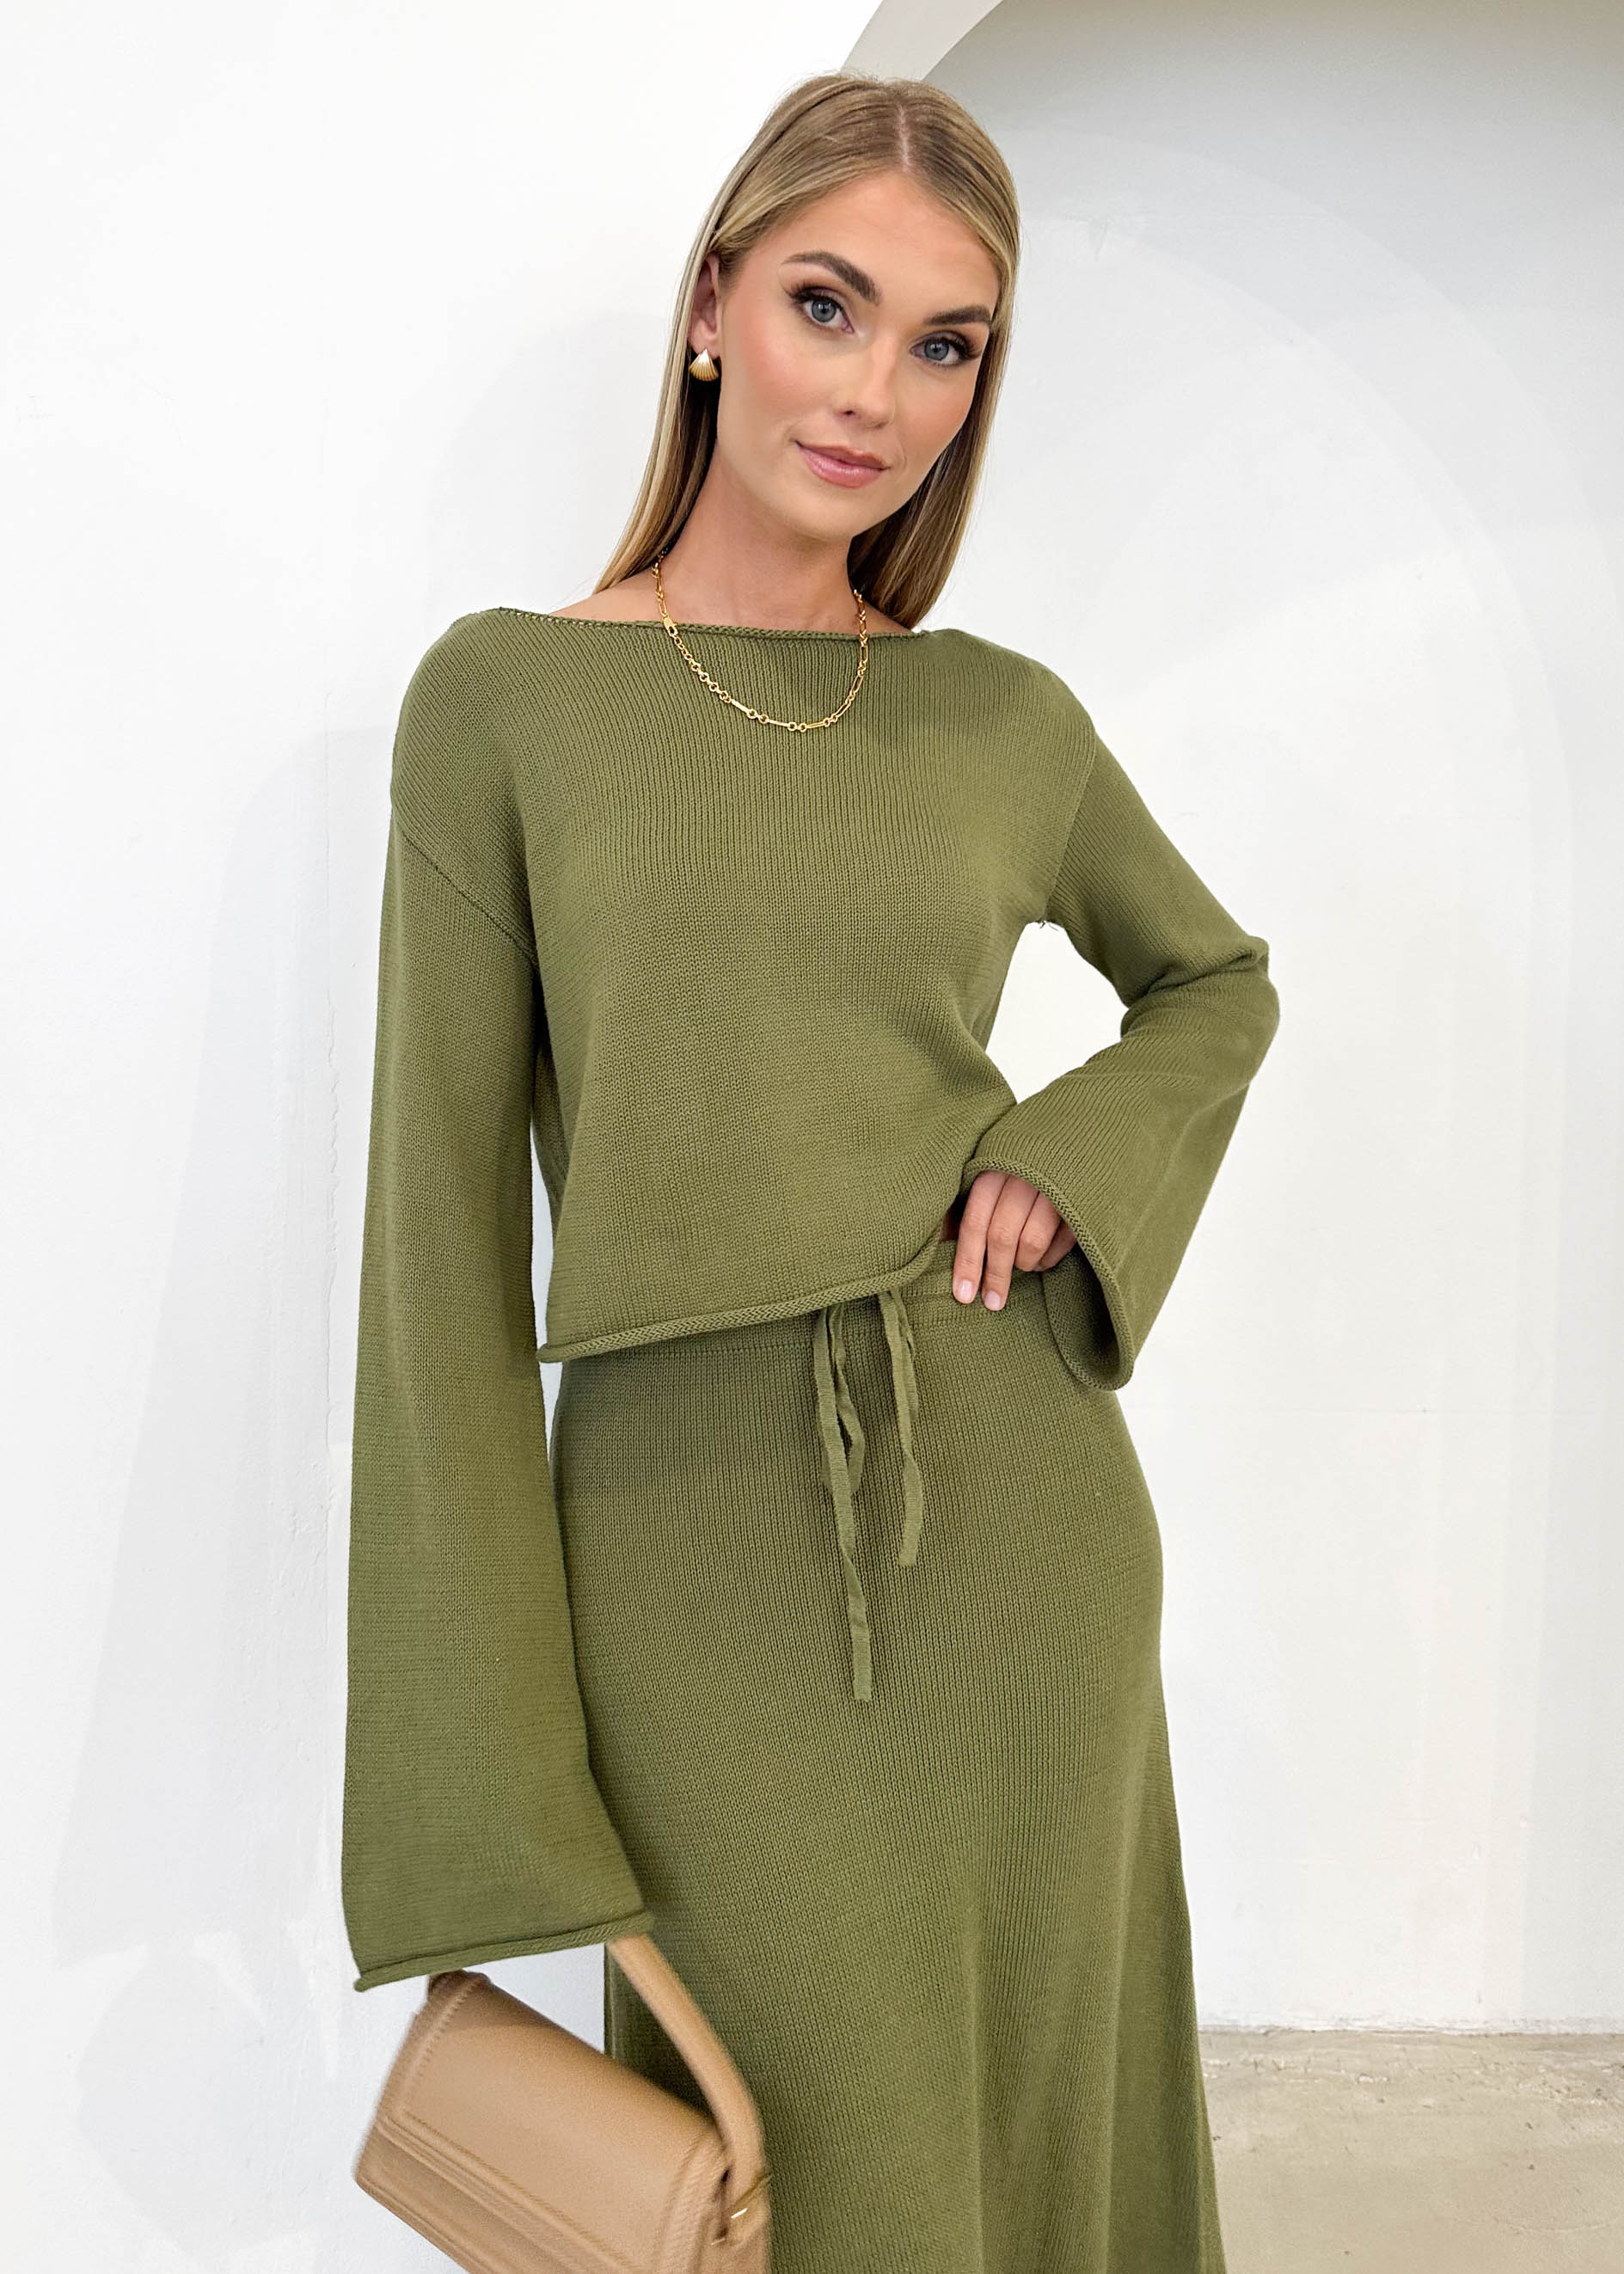 Emerson Knit Top - Olive